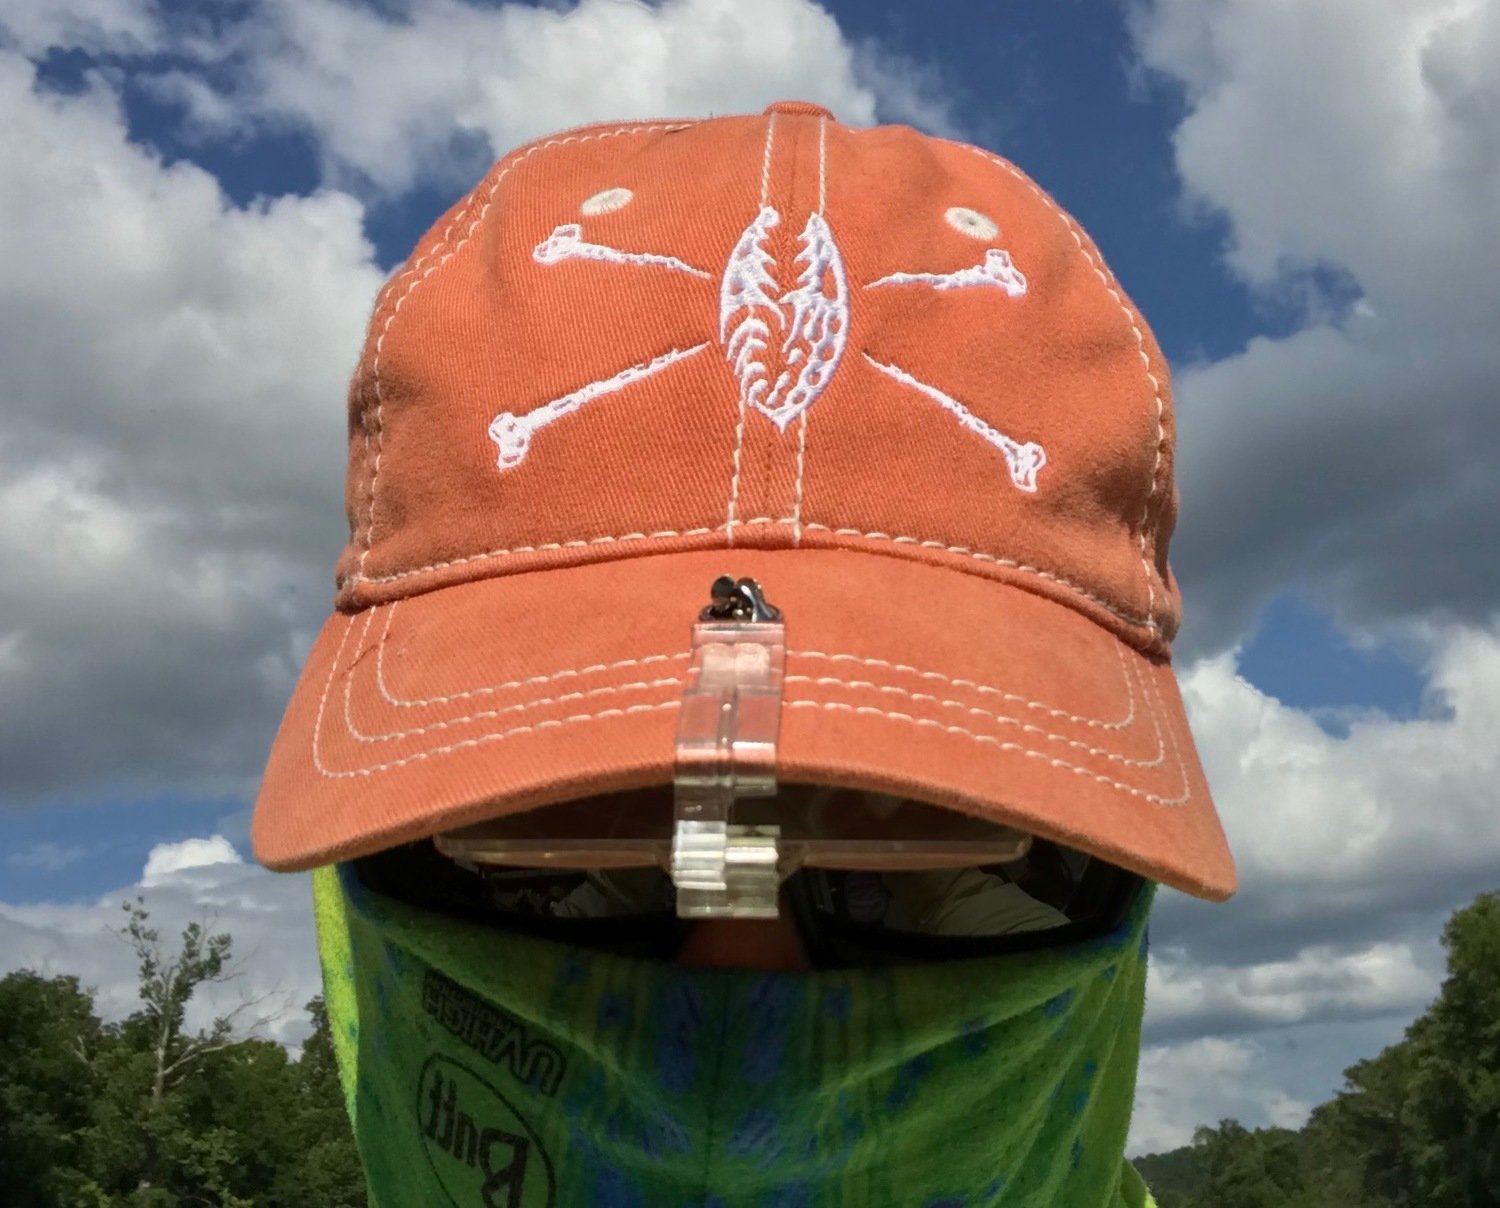 Chartered Waters Hat